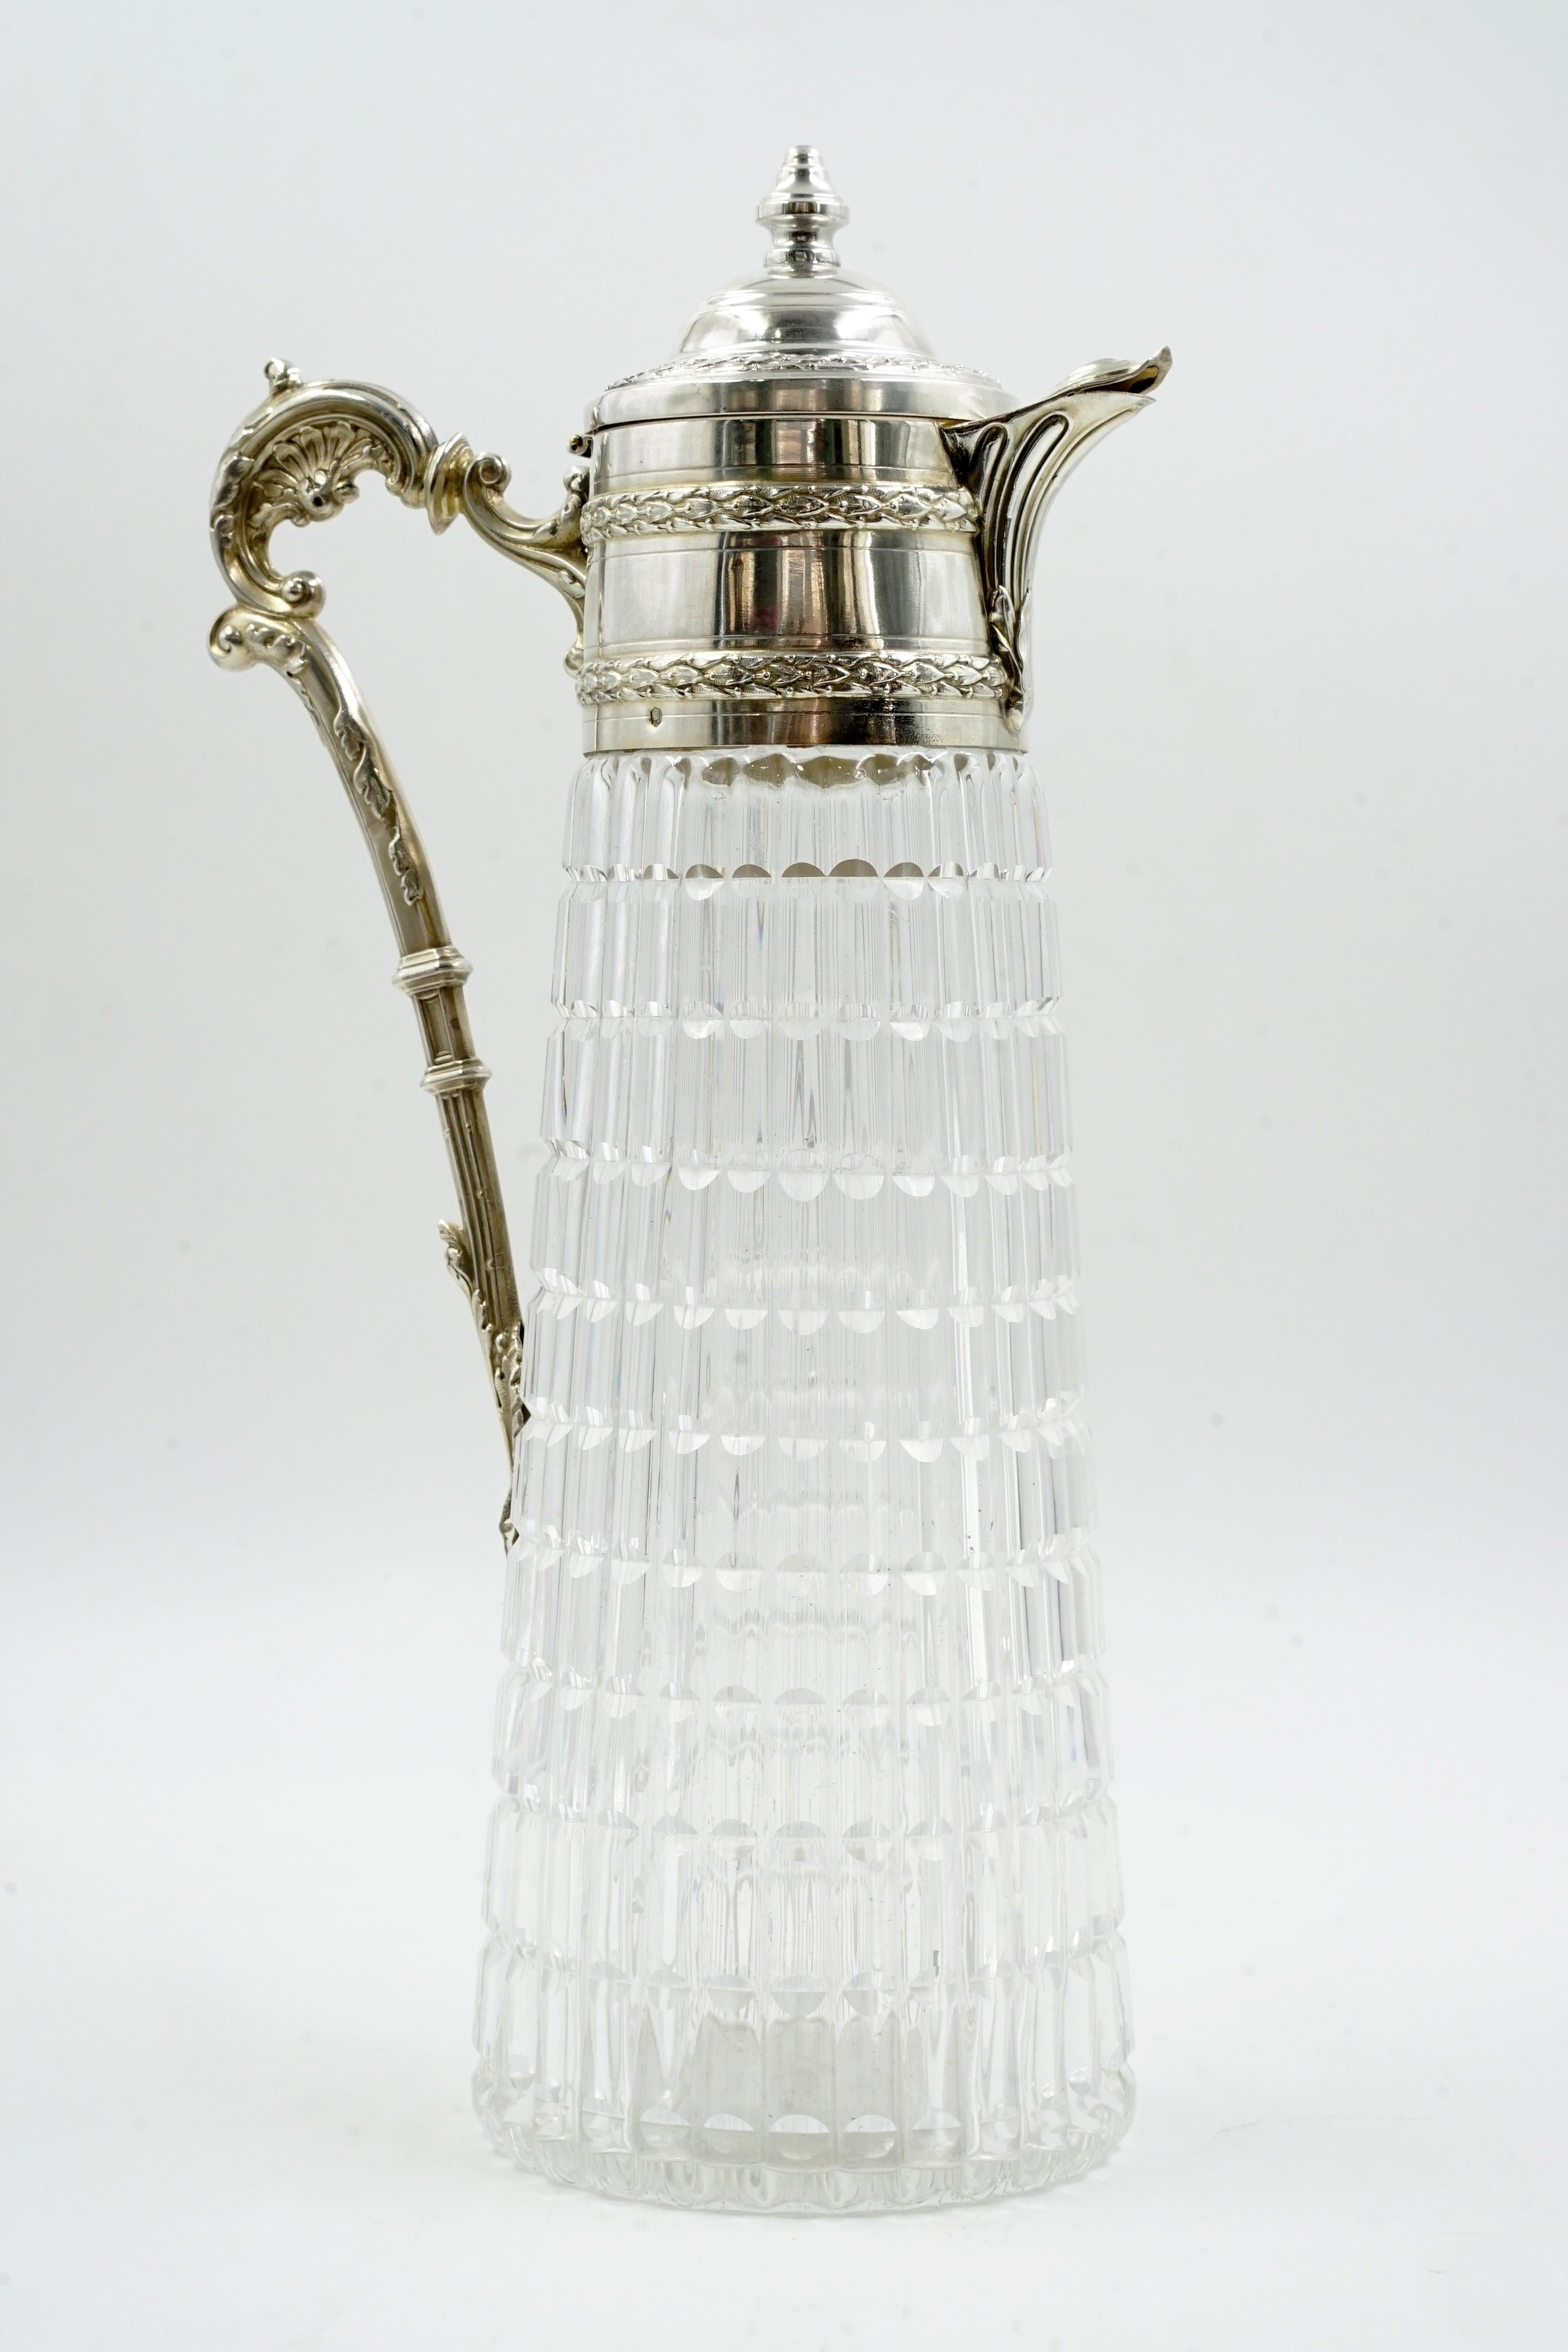 Silver French Napoleon III silver jug or decanter For Sale